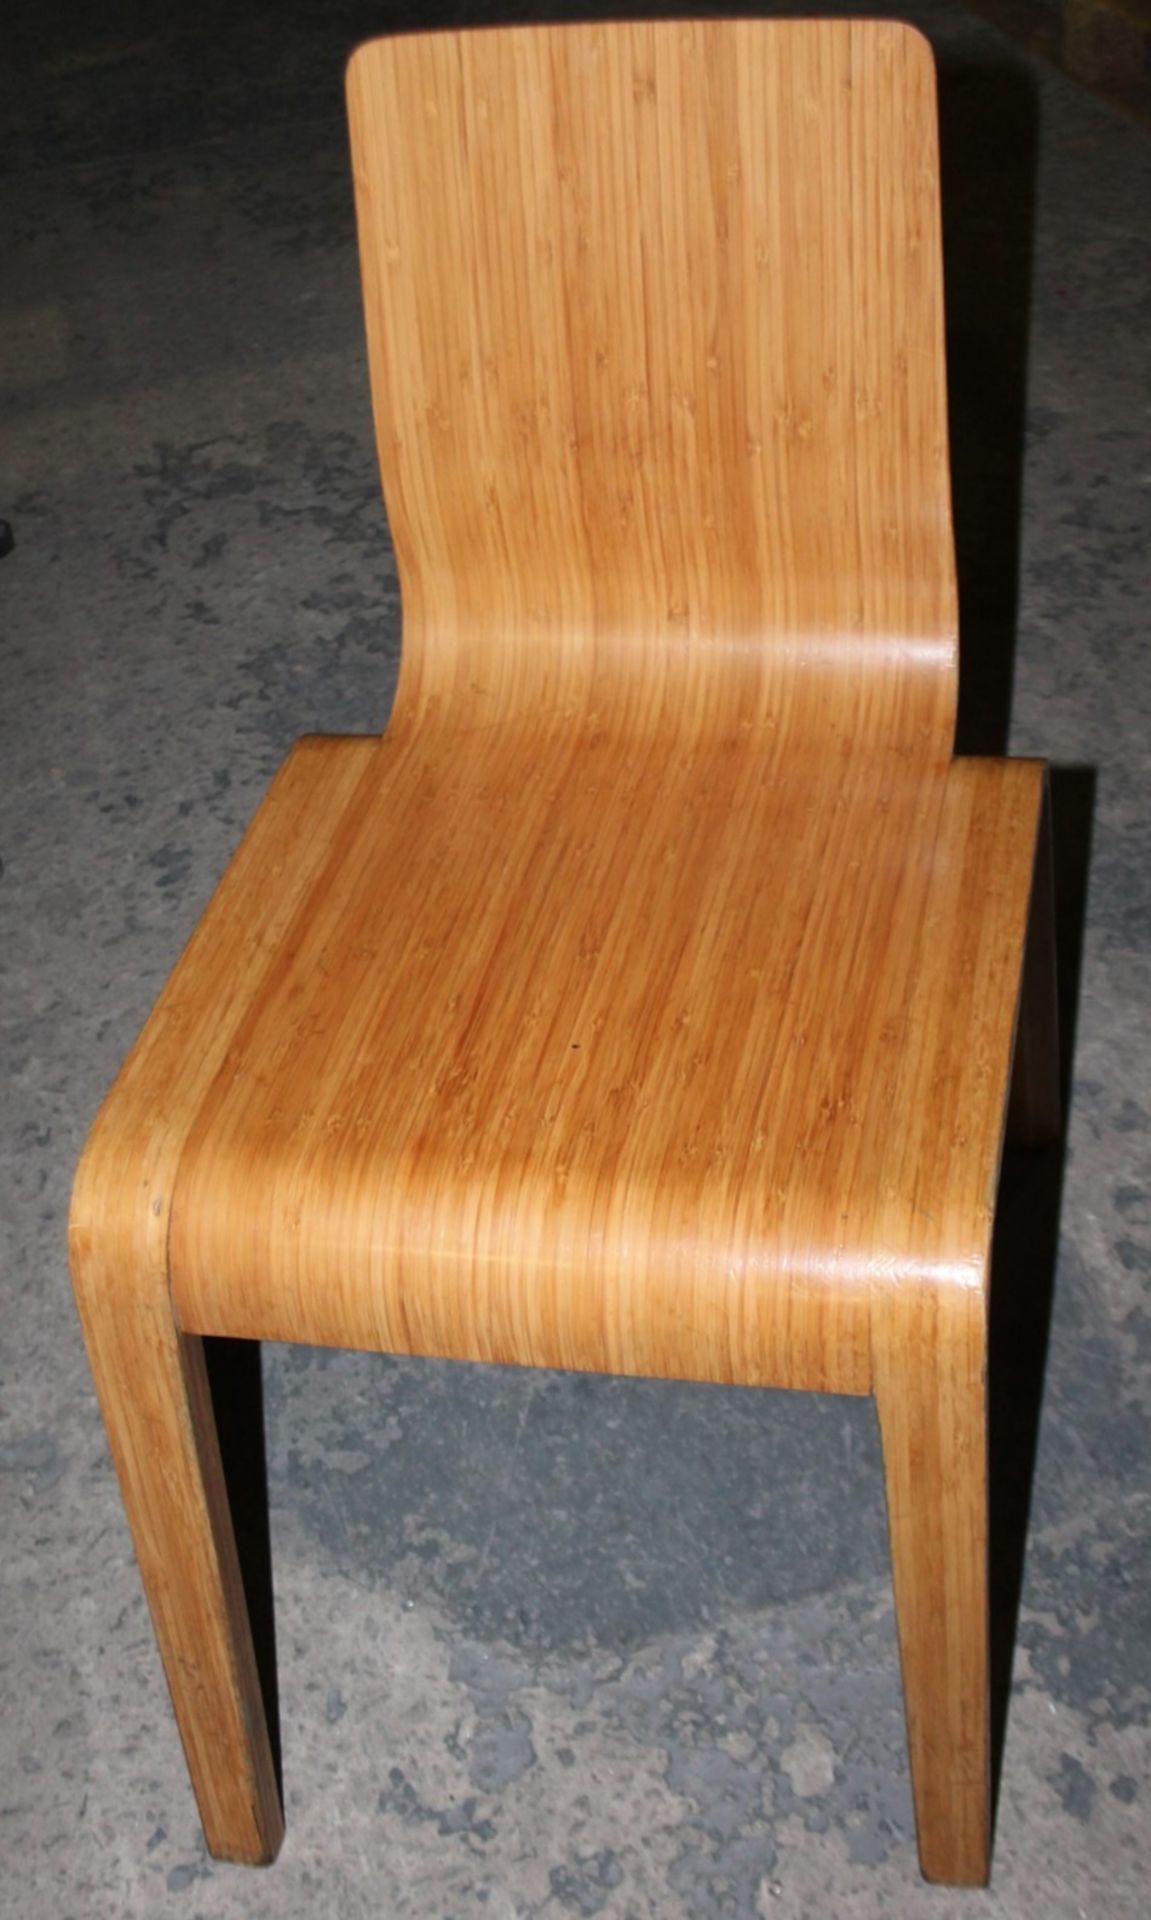 1 x Stylish Wooden Chair With A Curved Design - Dimensions: H80 x W42 x D58cm / Seat 44cm - Ref: - Image 4 of 7